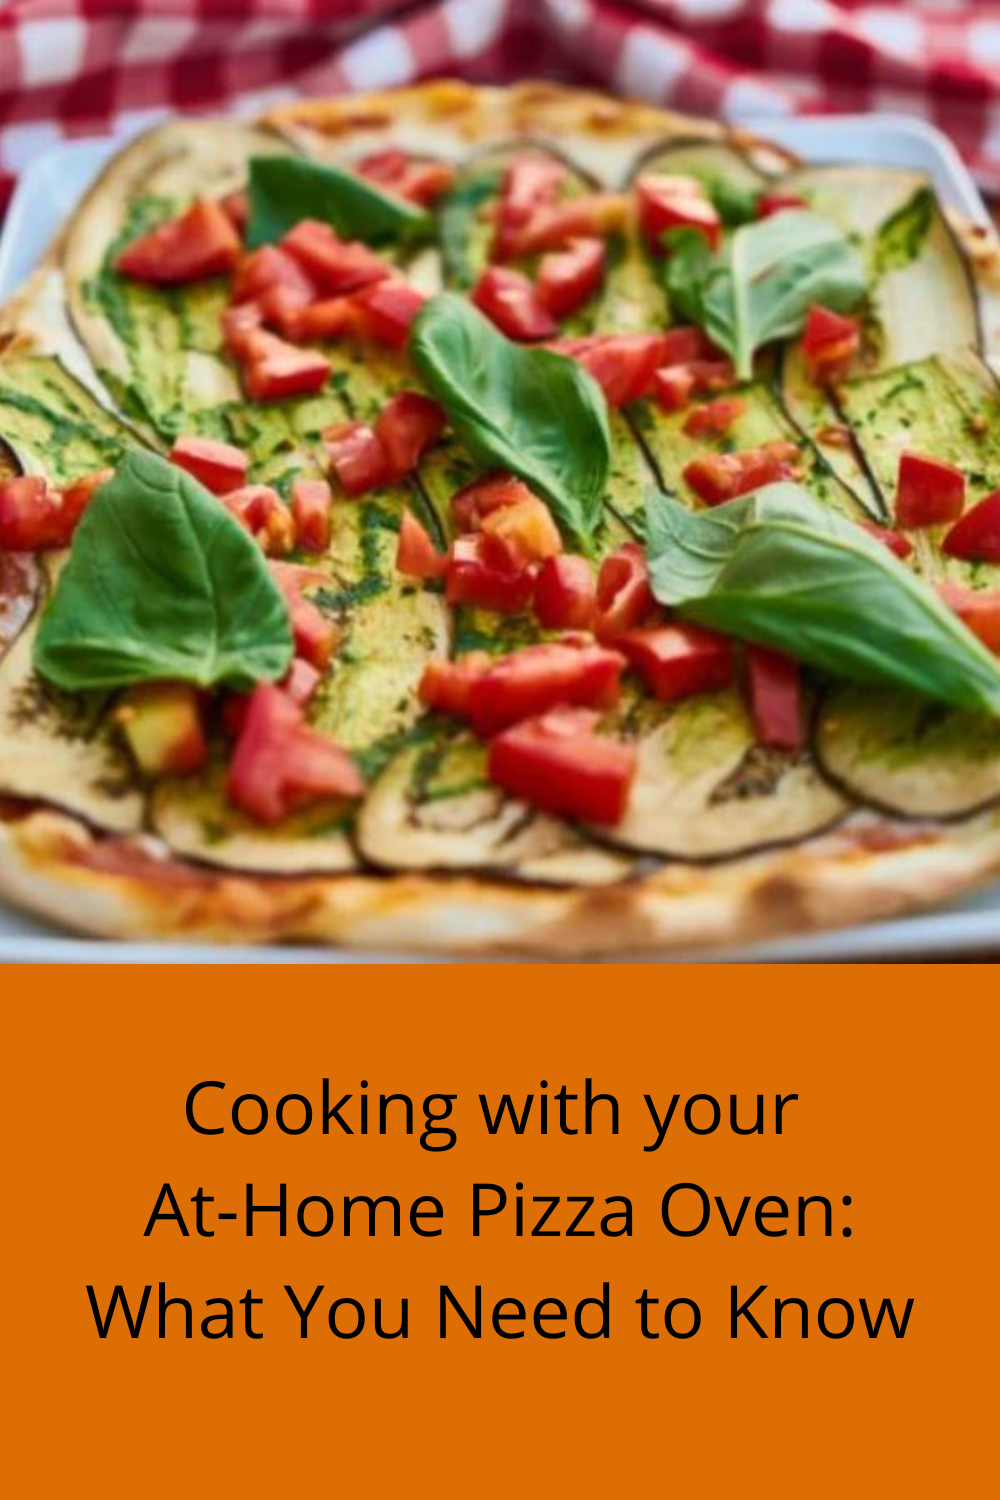 Cooking with your At-Home Pizza Oven: What You Need to Know